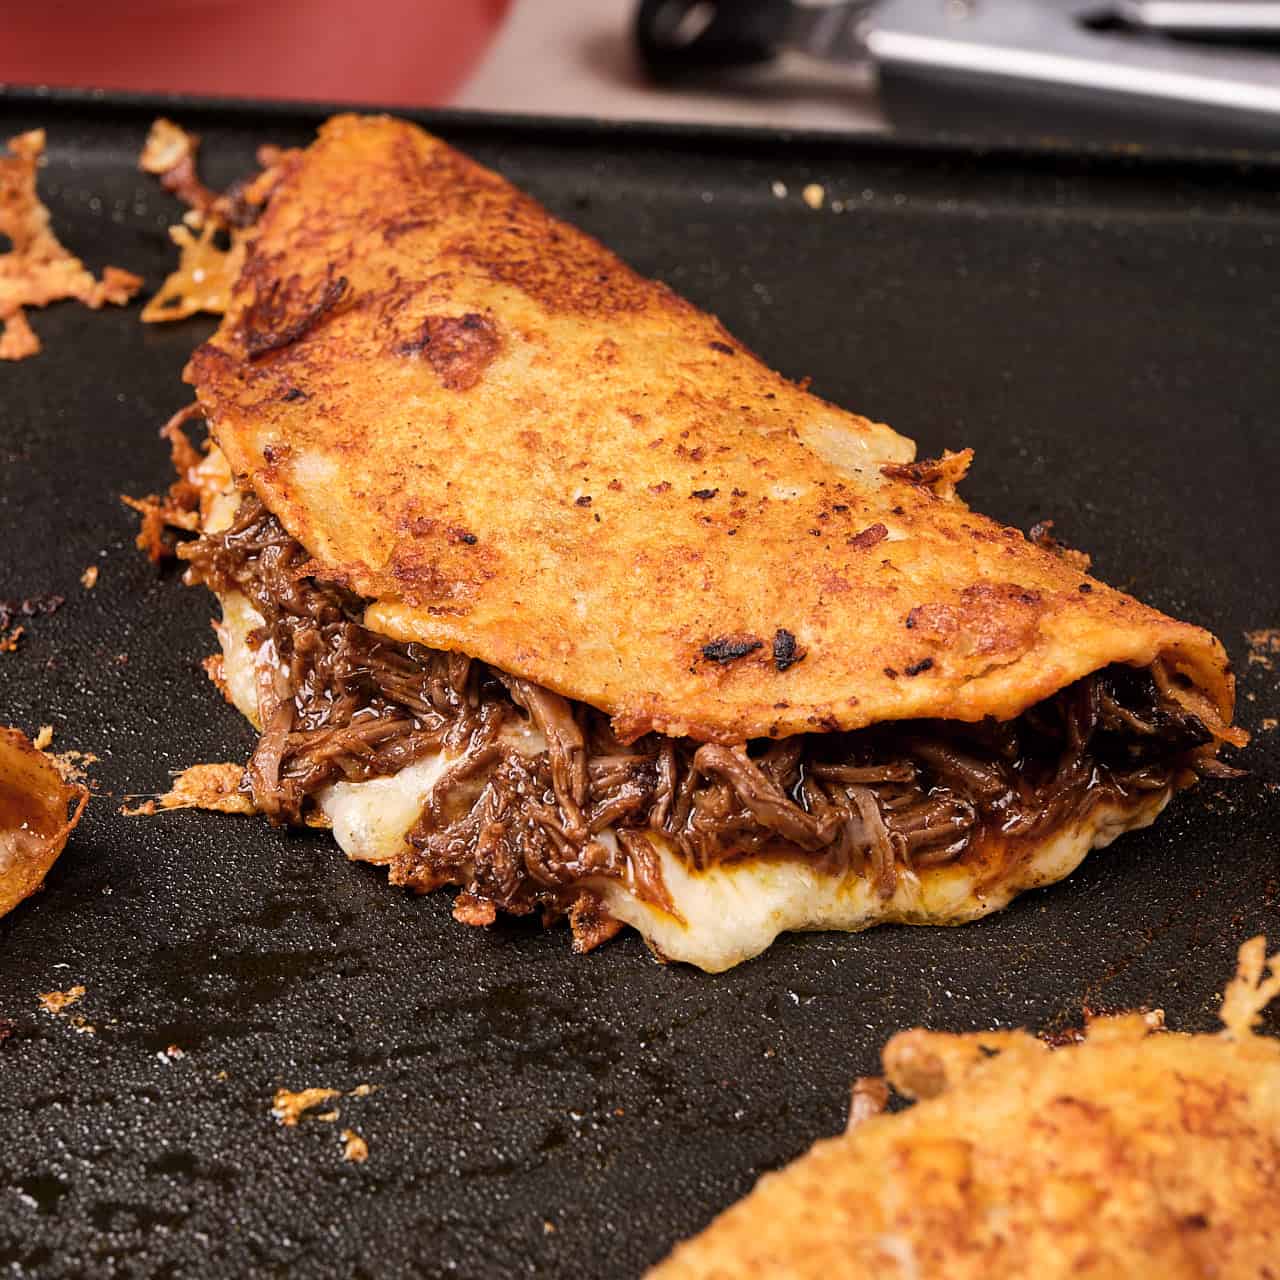 A birria taco cooking on the griddle